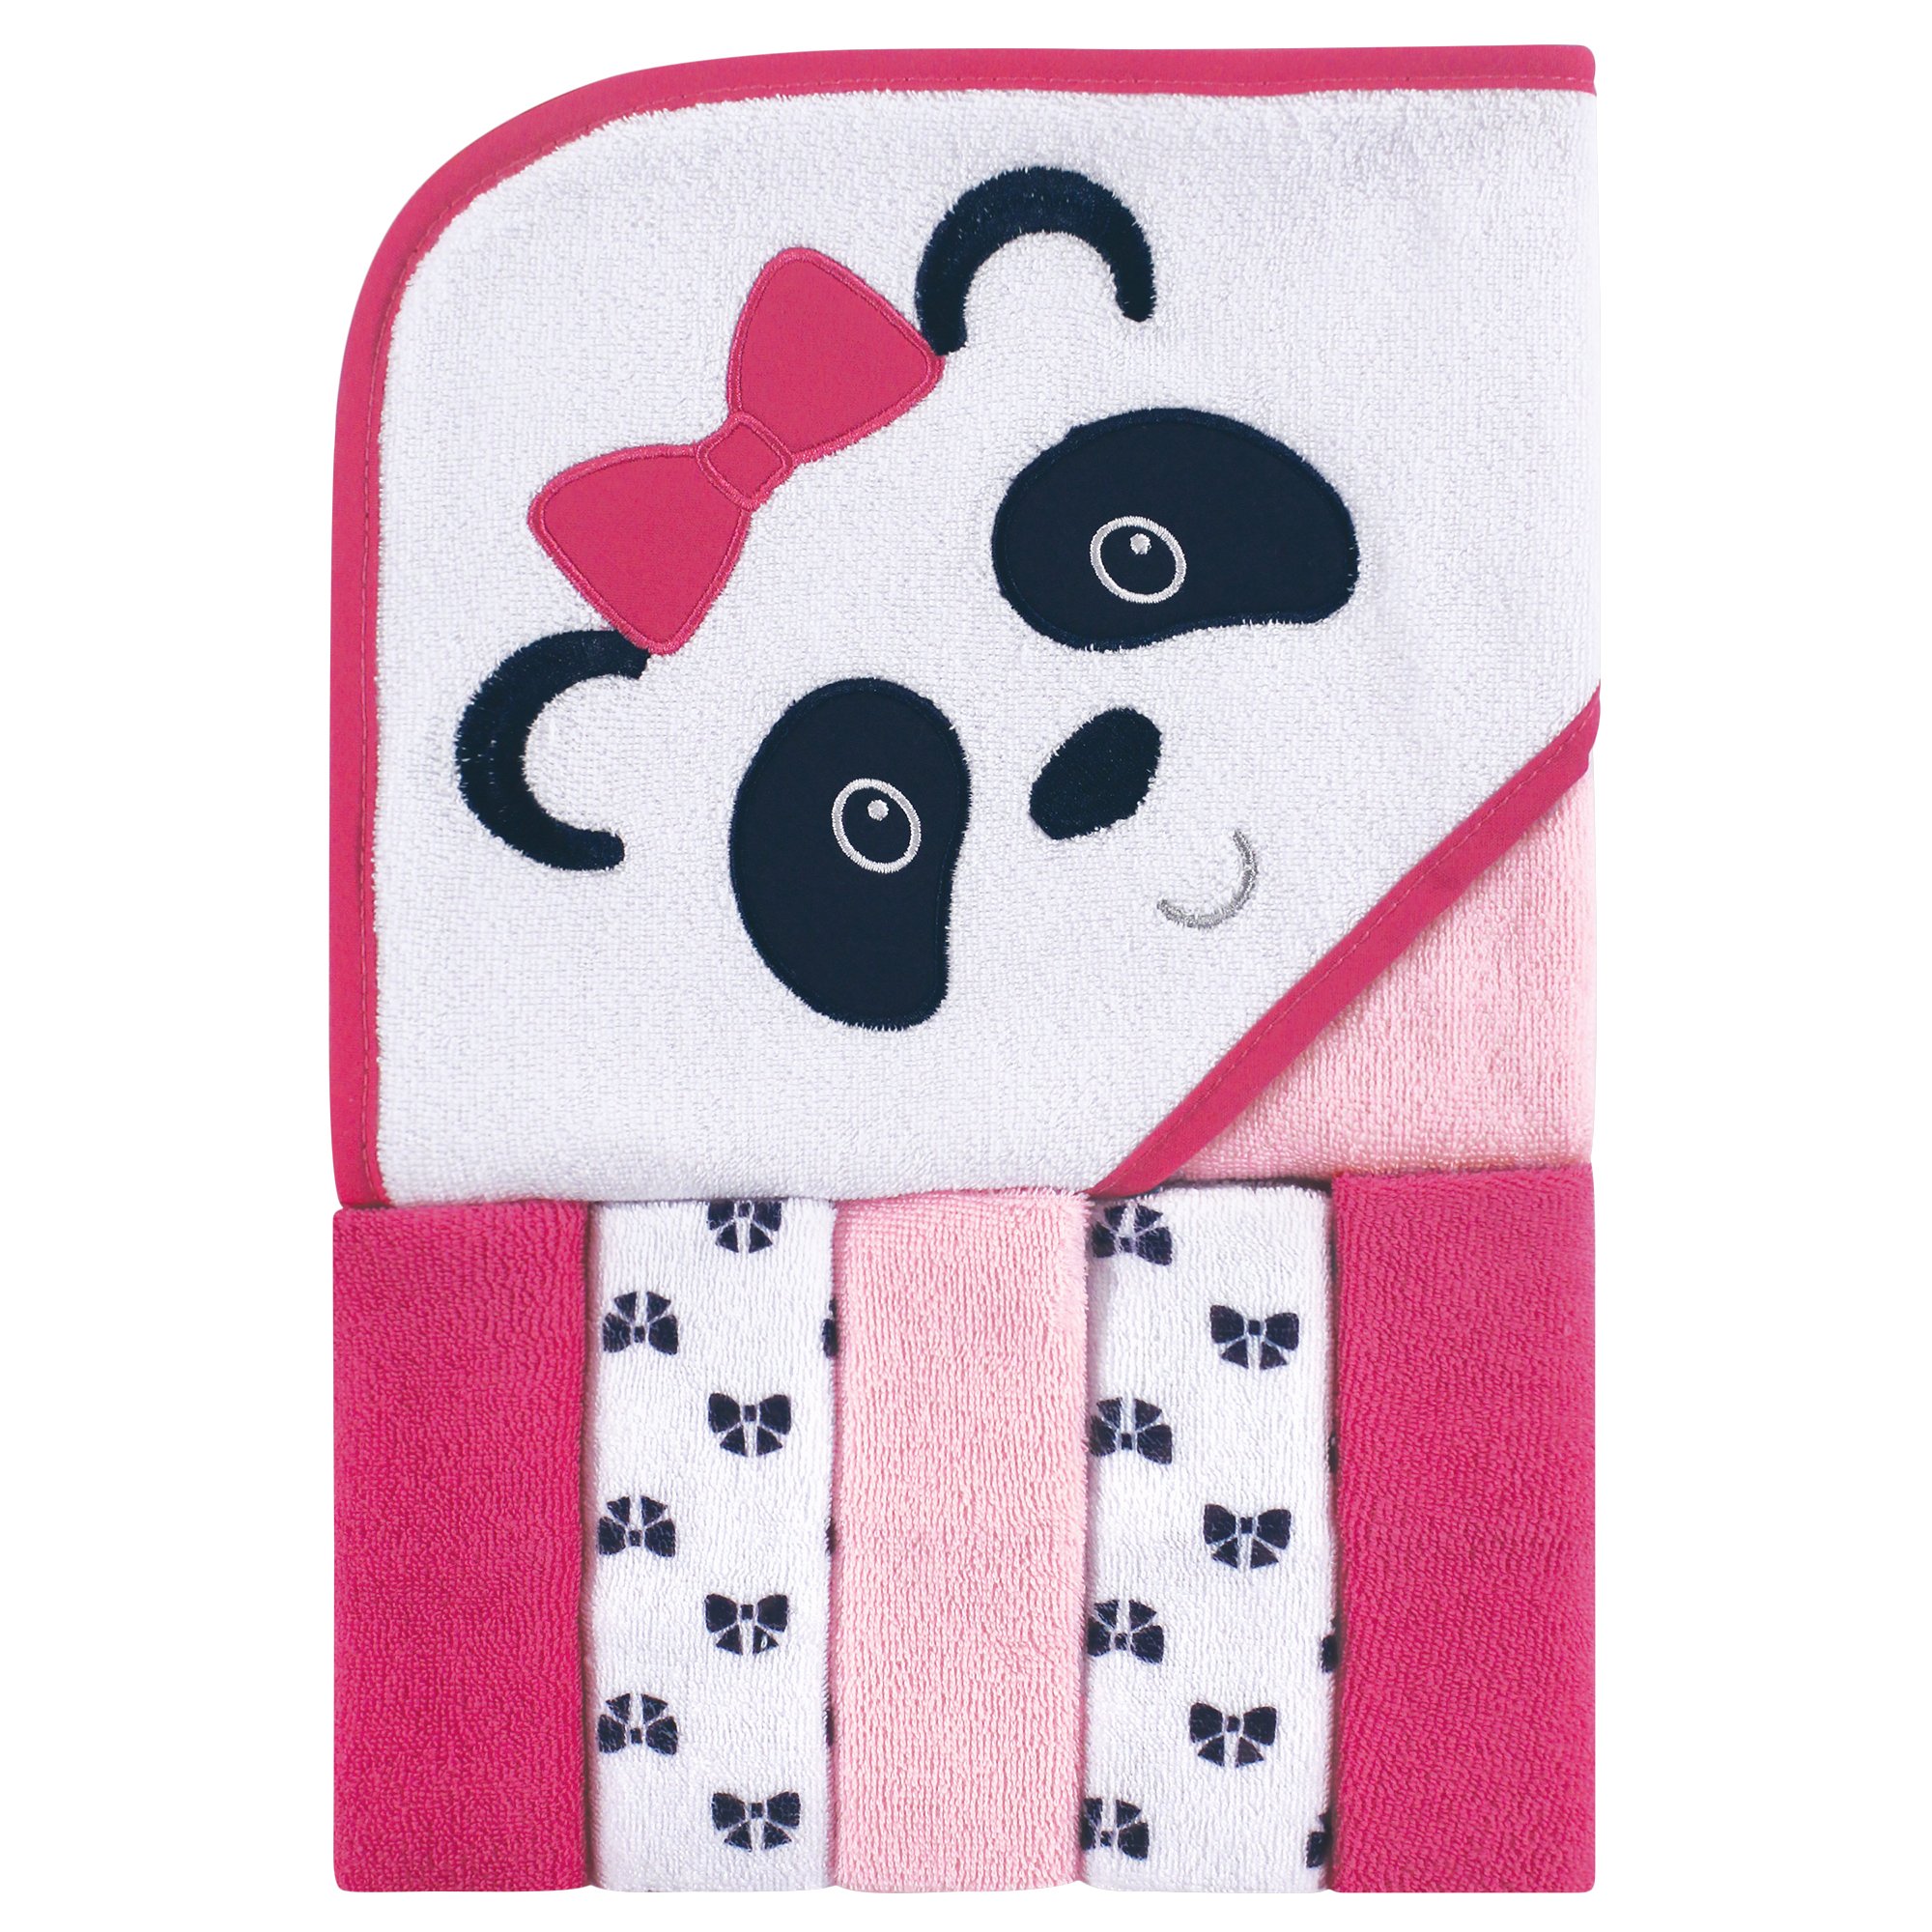 Luvable Friends Unisex Baby Hooded Towel With Five Washcloths, Panda, One Size